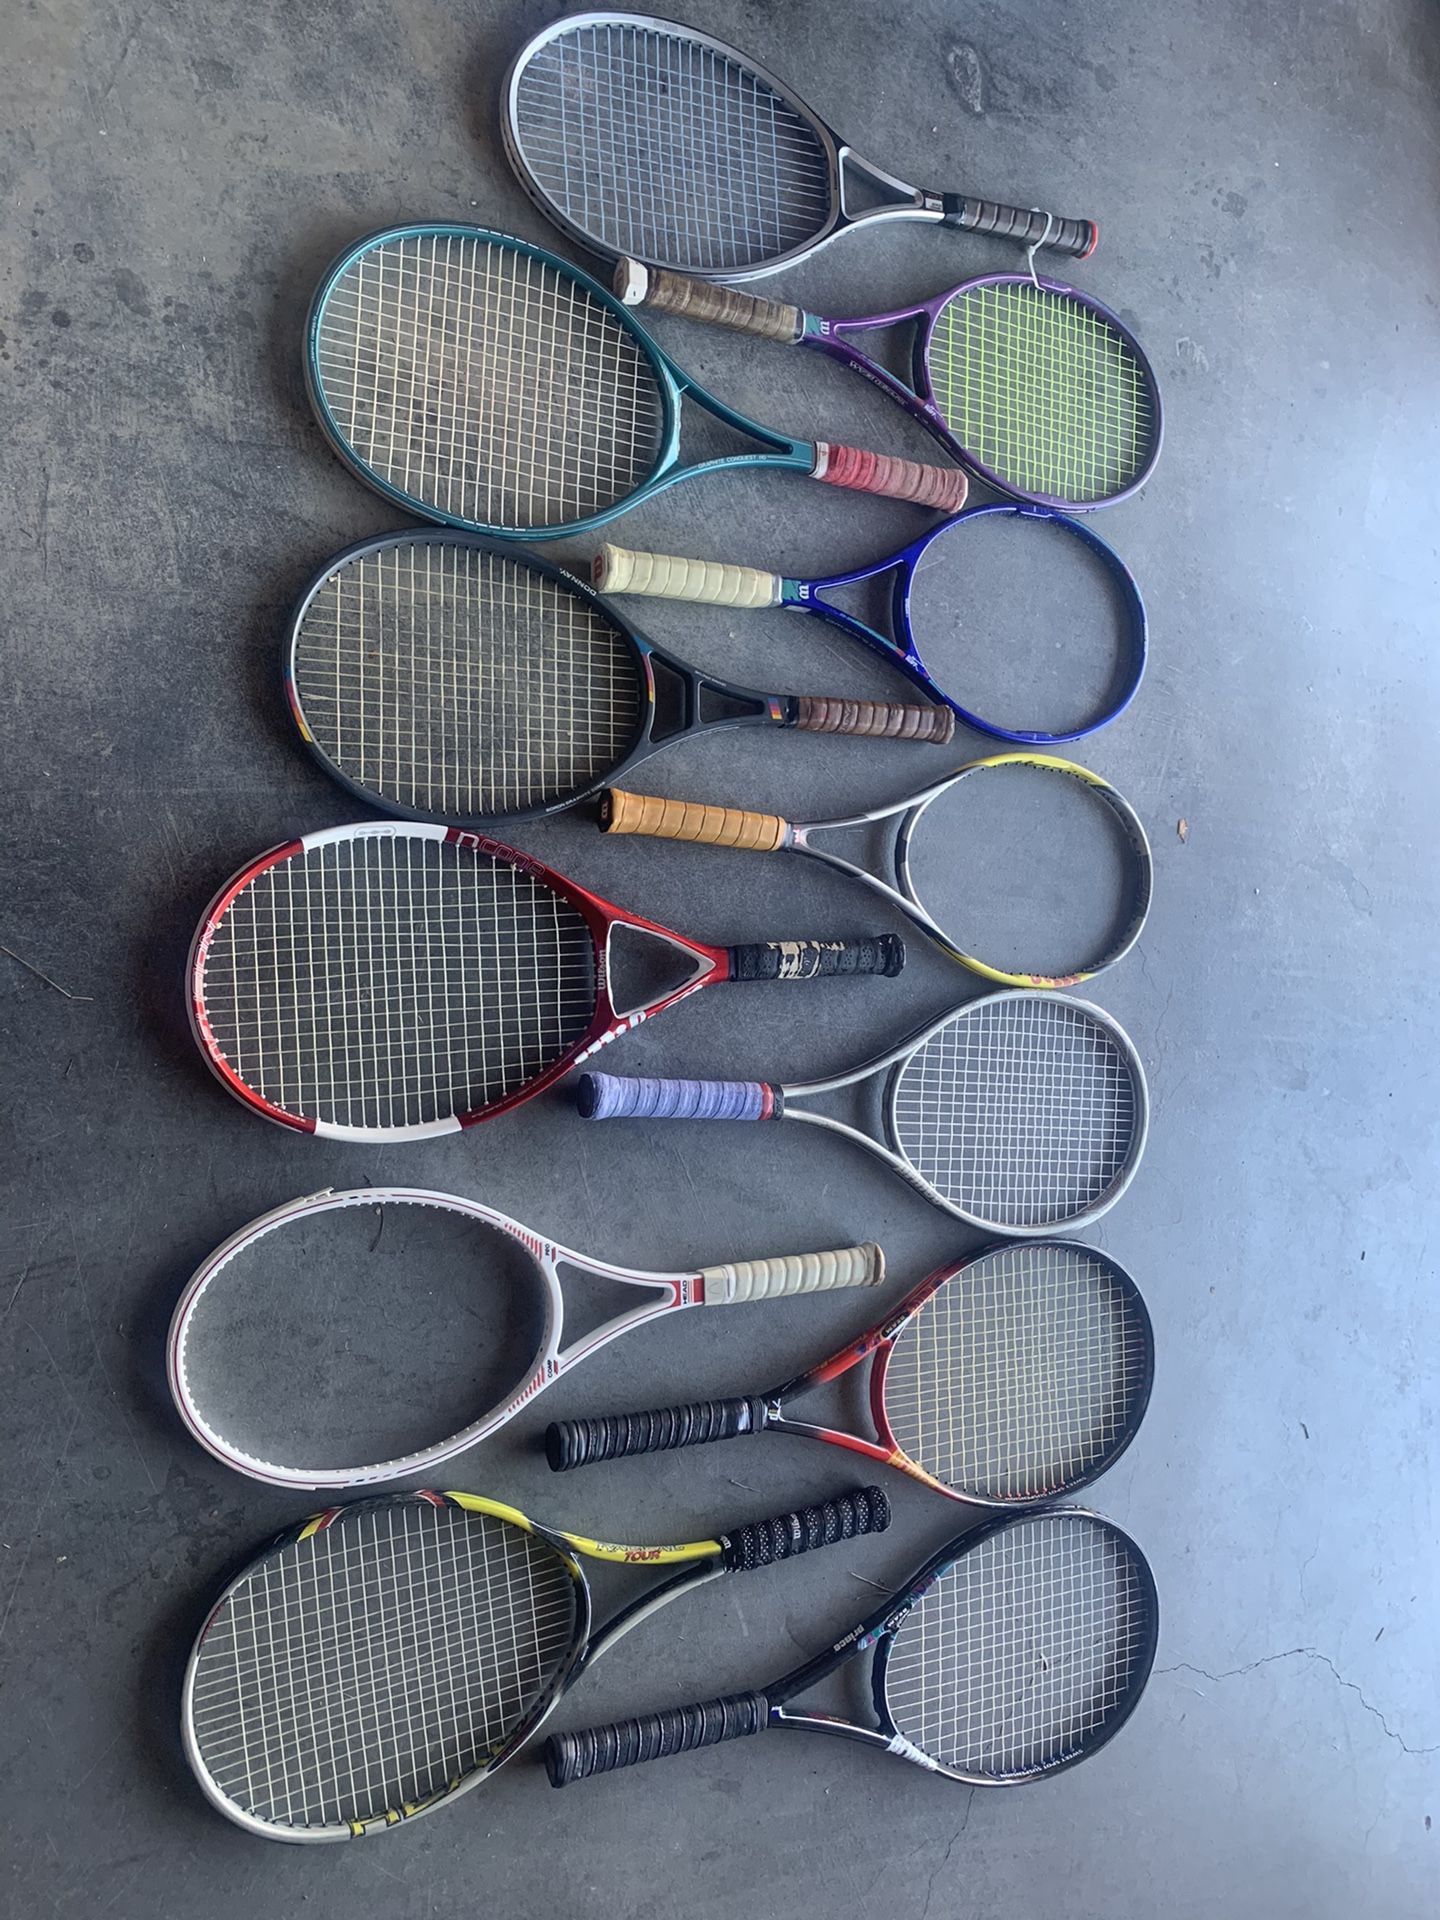 Tennis racket collection